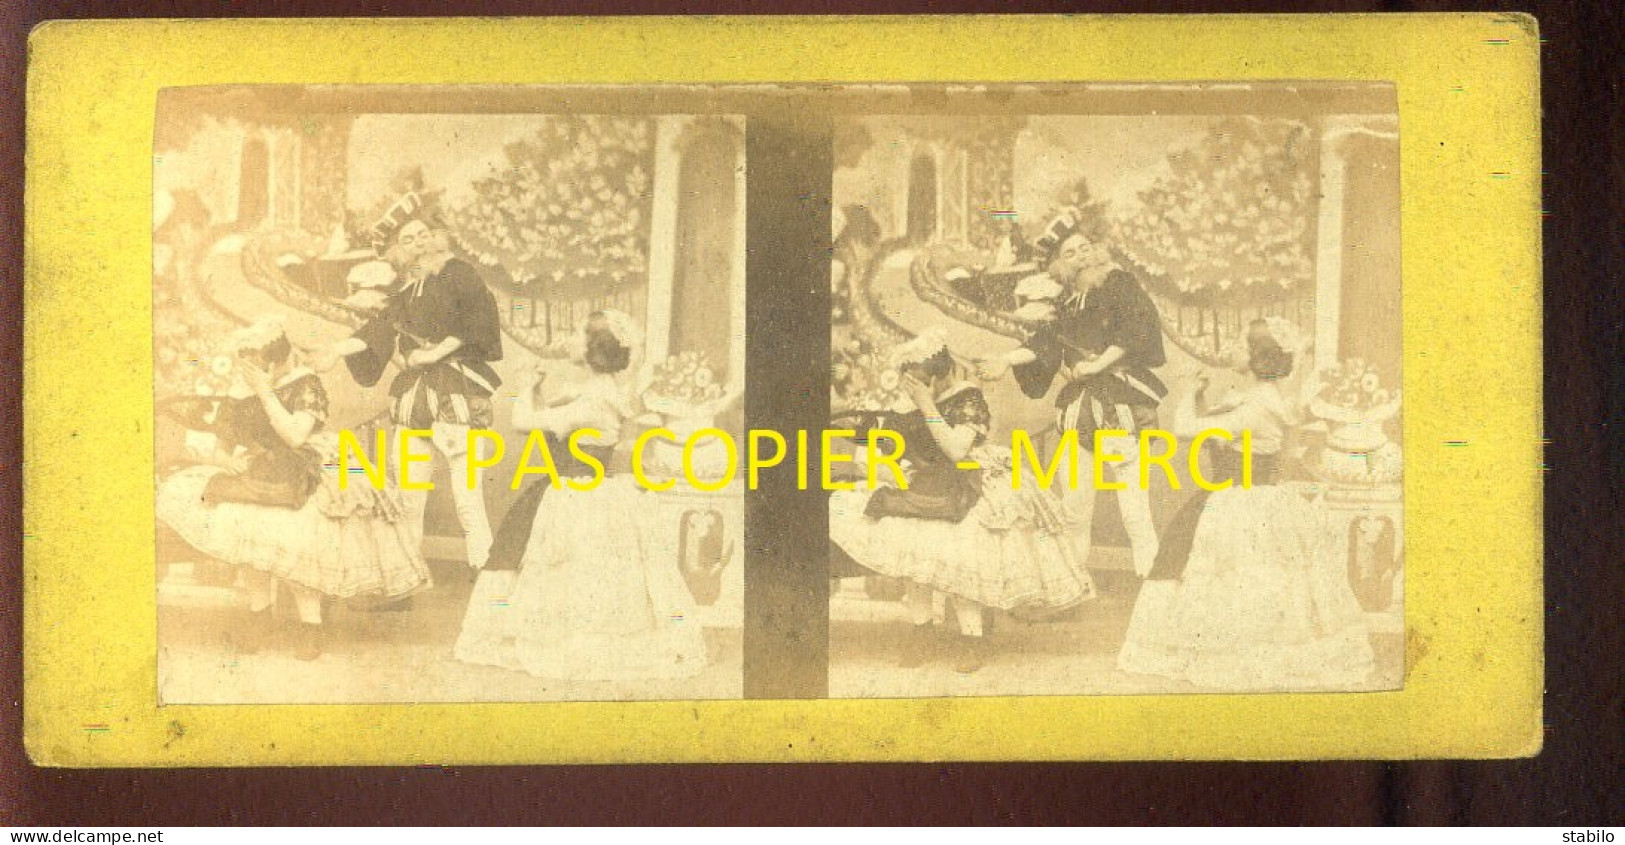 PHOTO STEREO - SCENE THEATRALE - FORMAT 17 X 8.5 CM  - Stereo-Photographie